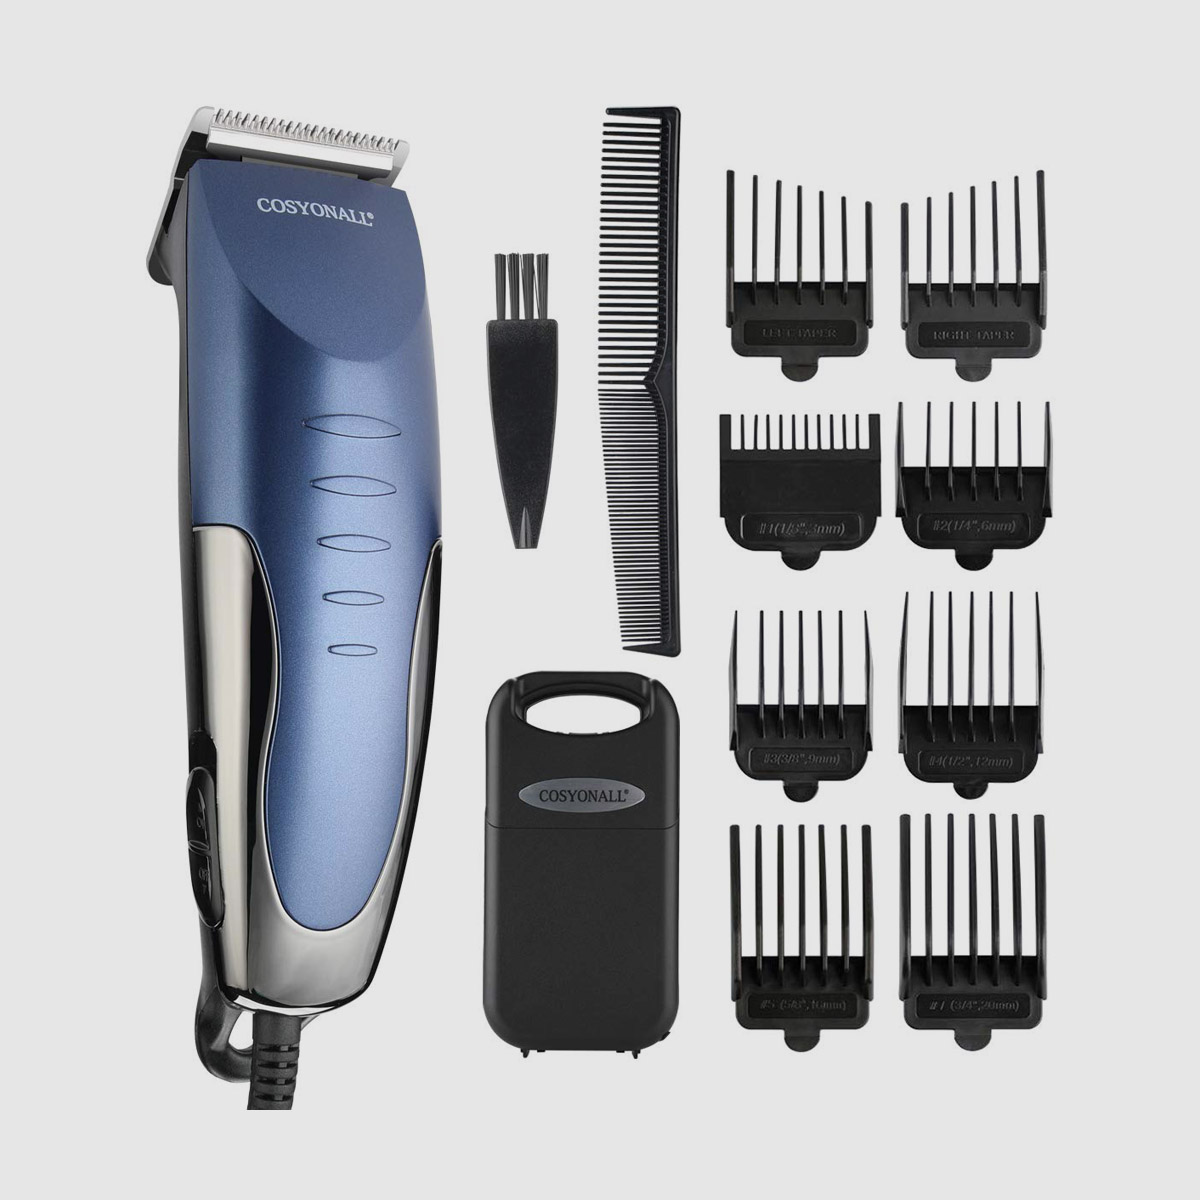 Pro Corded Hair Trimmer Cutting Kit